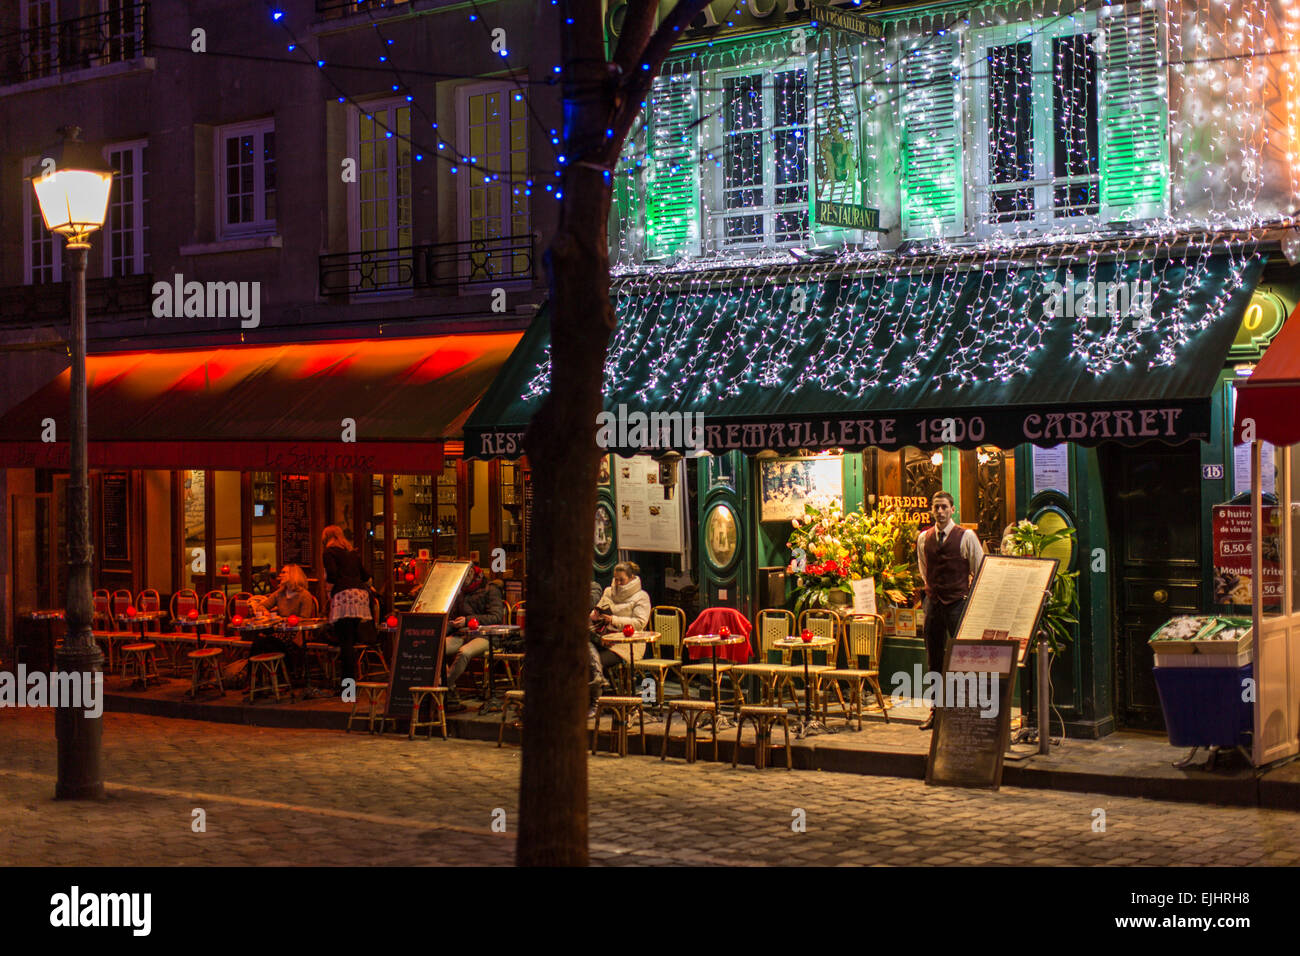 Outdoor cafe restaurant in Montmartre at night, Paris, France Stock Photo